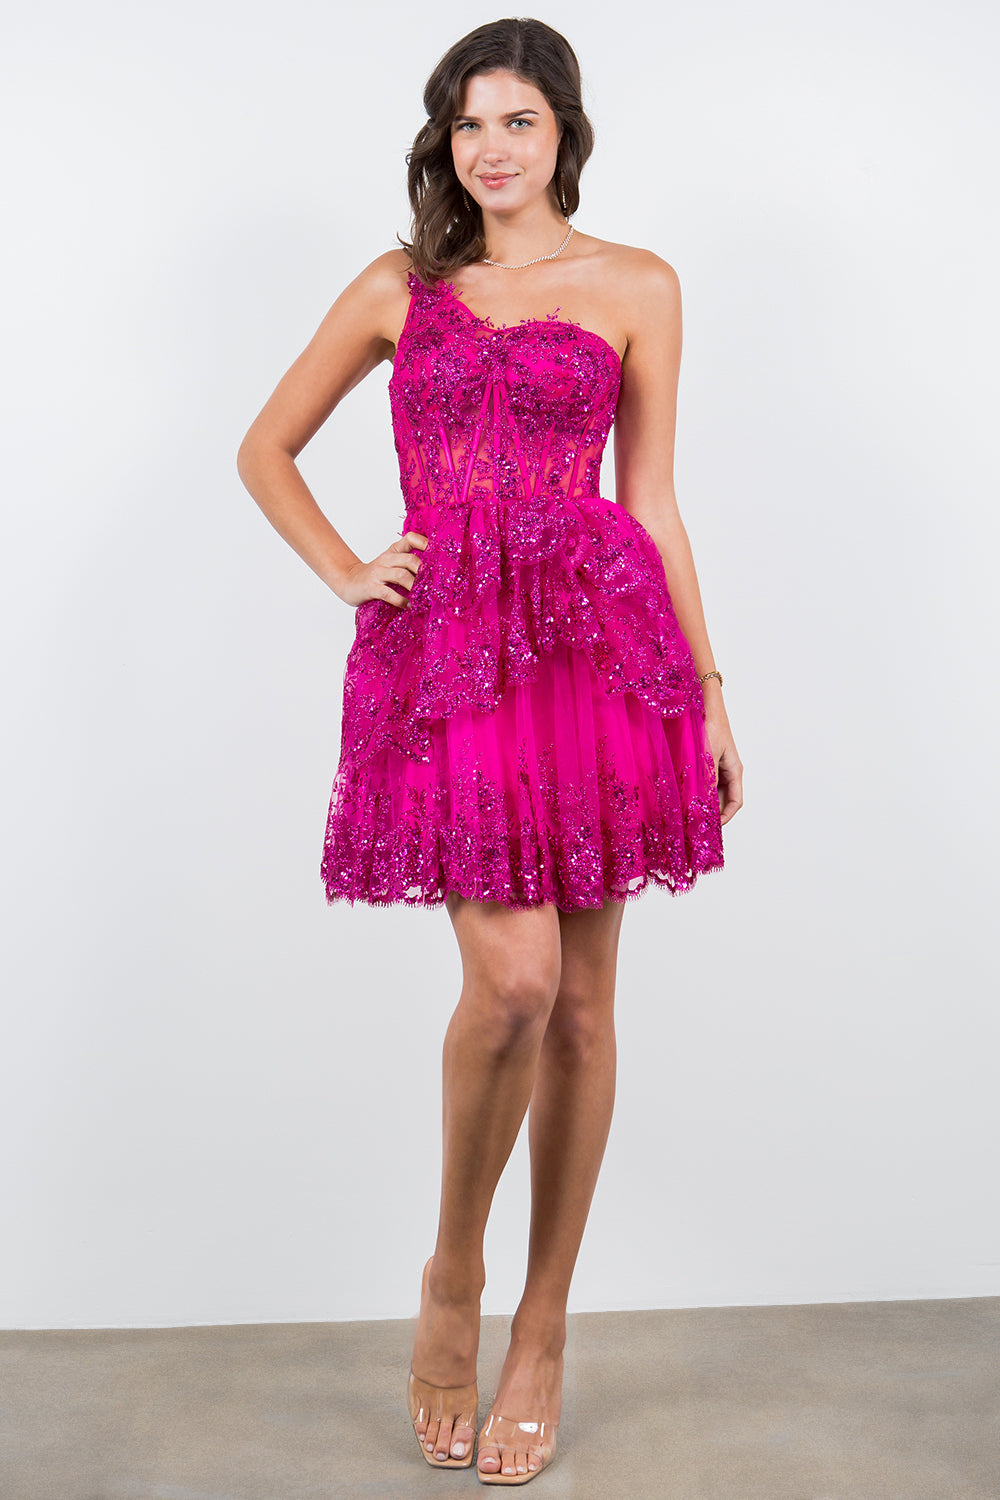 Short One Shoulder Tiered Dress by Cinderella Couture 5132J - Outlet